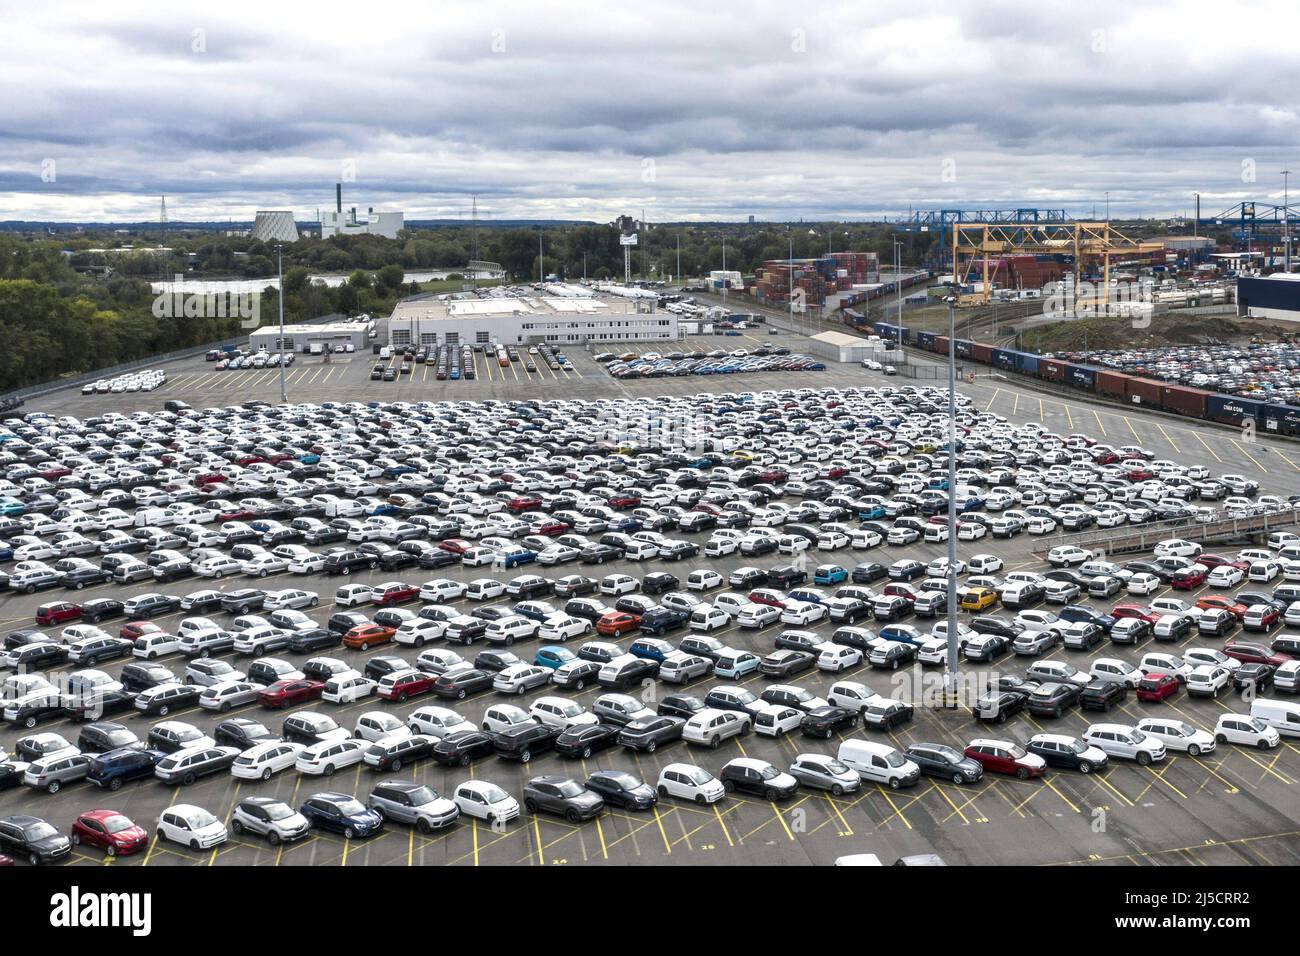 Duisburg, DEU, 27.09.2020 - Car terminal in the inland port Logport 1, Duisburg, vehicle handling of new cars. The Krupp steel mill was located here until 1993. [automated translation] Stock Photo